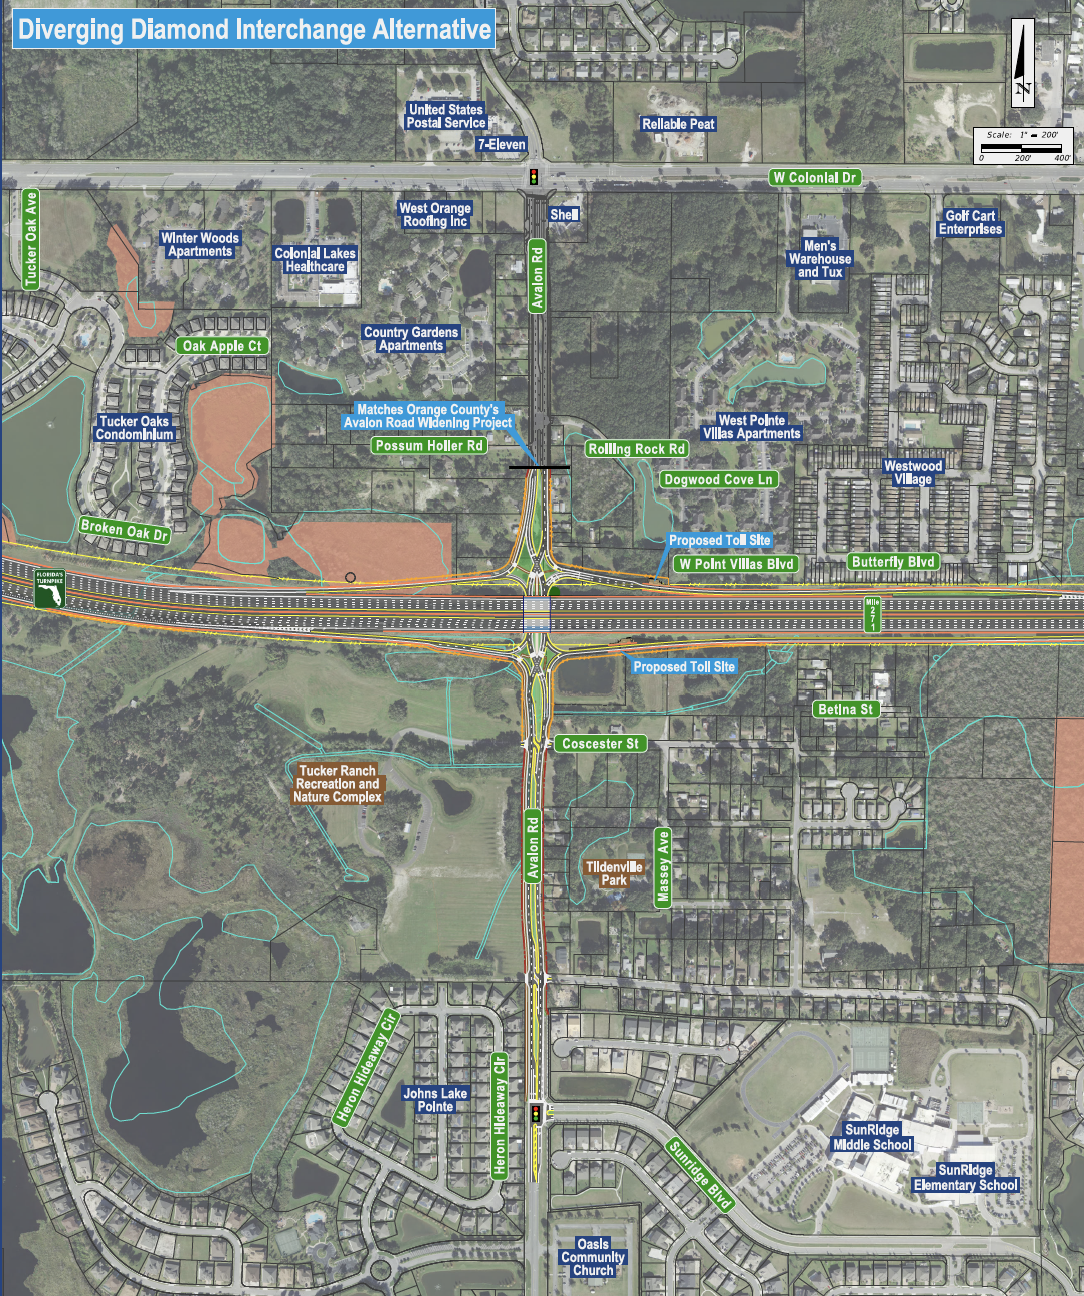 One of three proposed options for an Avalon Road interchange on the Florida's Turnpike. Map legend below.